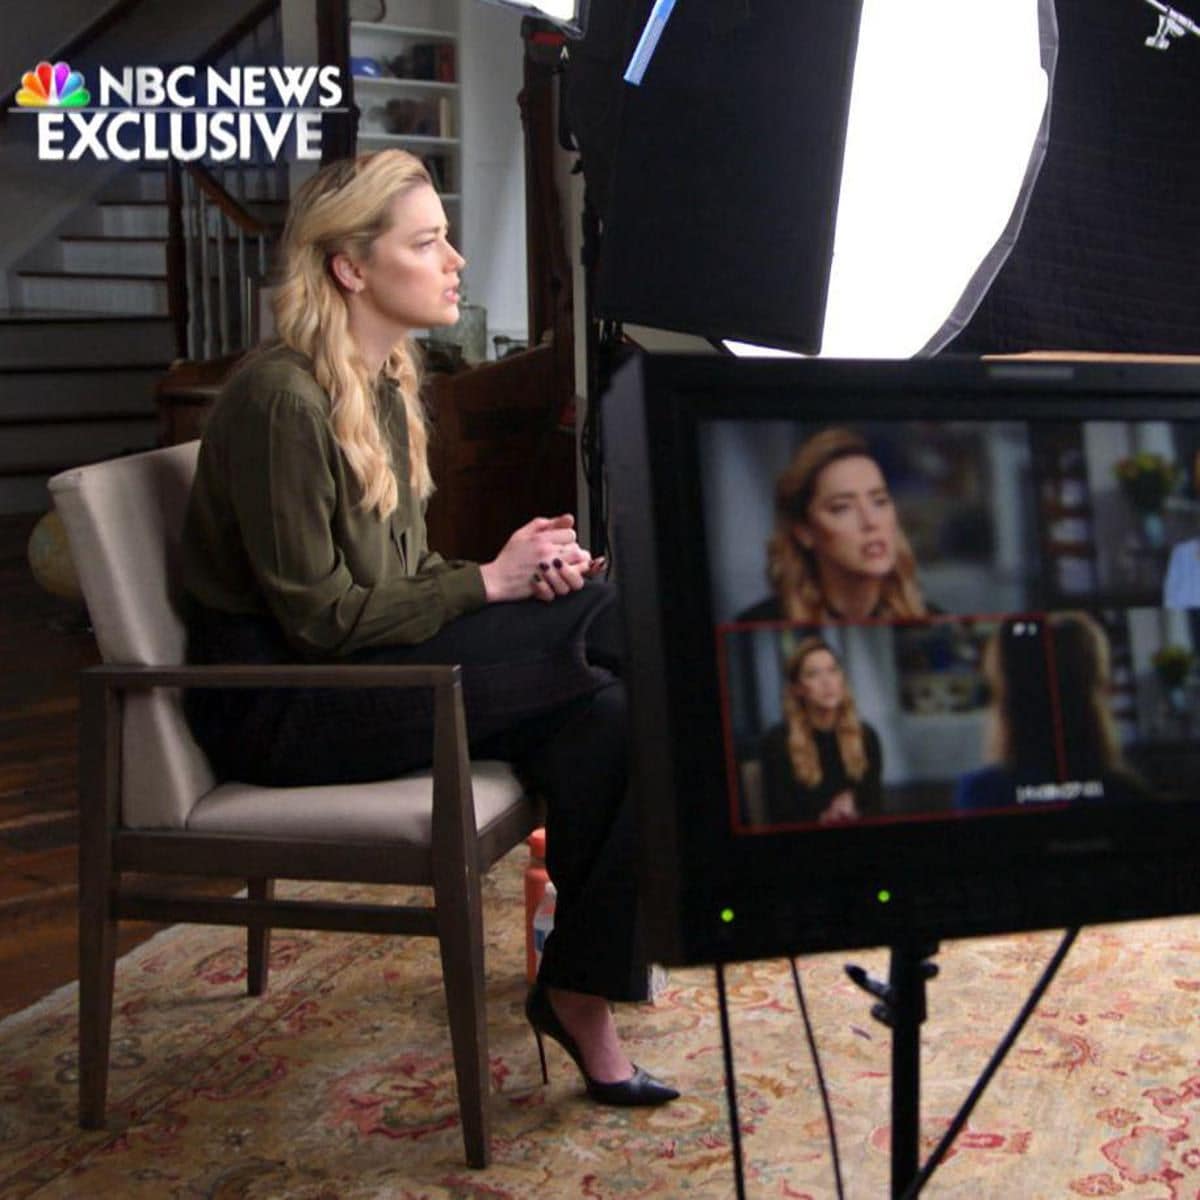 NBC News Exclusive interview of Amber Heard with Savannah Guthrie.